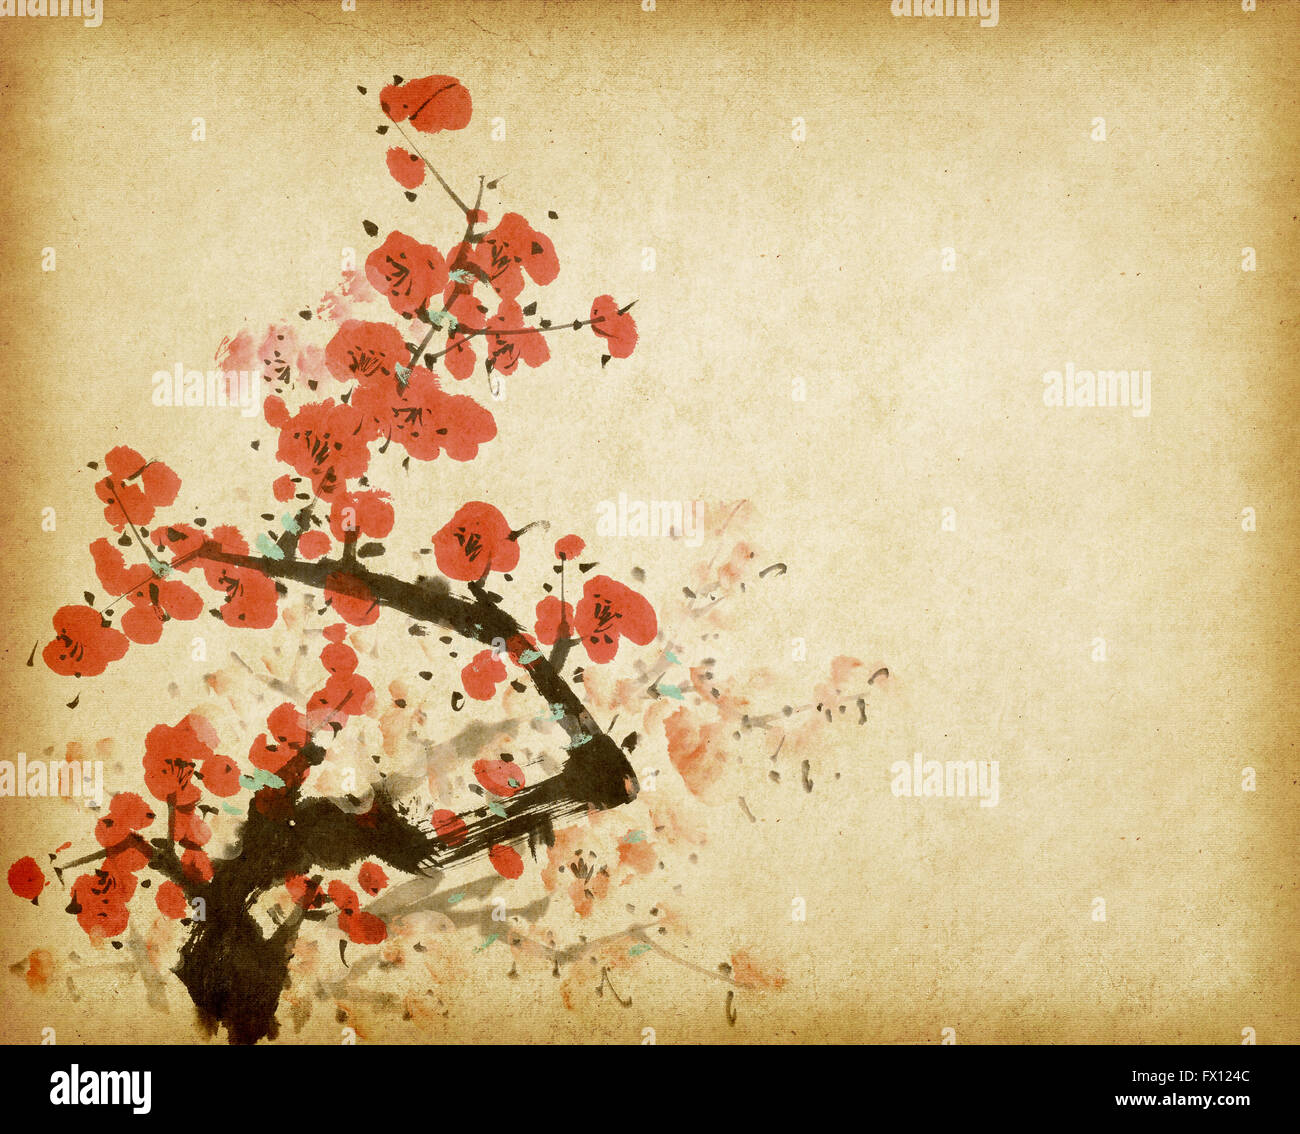 Traditional chinese painting Spring plum blossom on Old vintage paper background Stock Photo